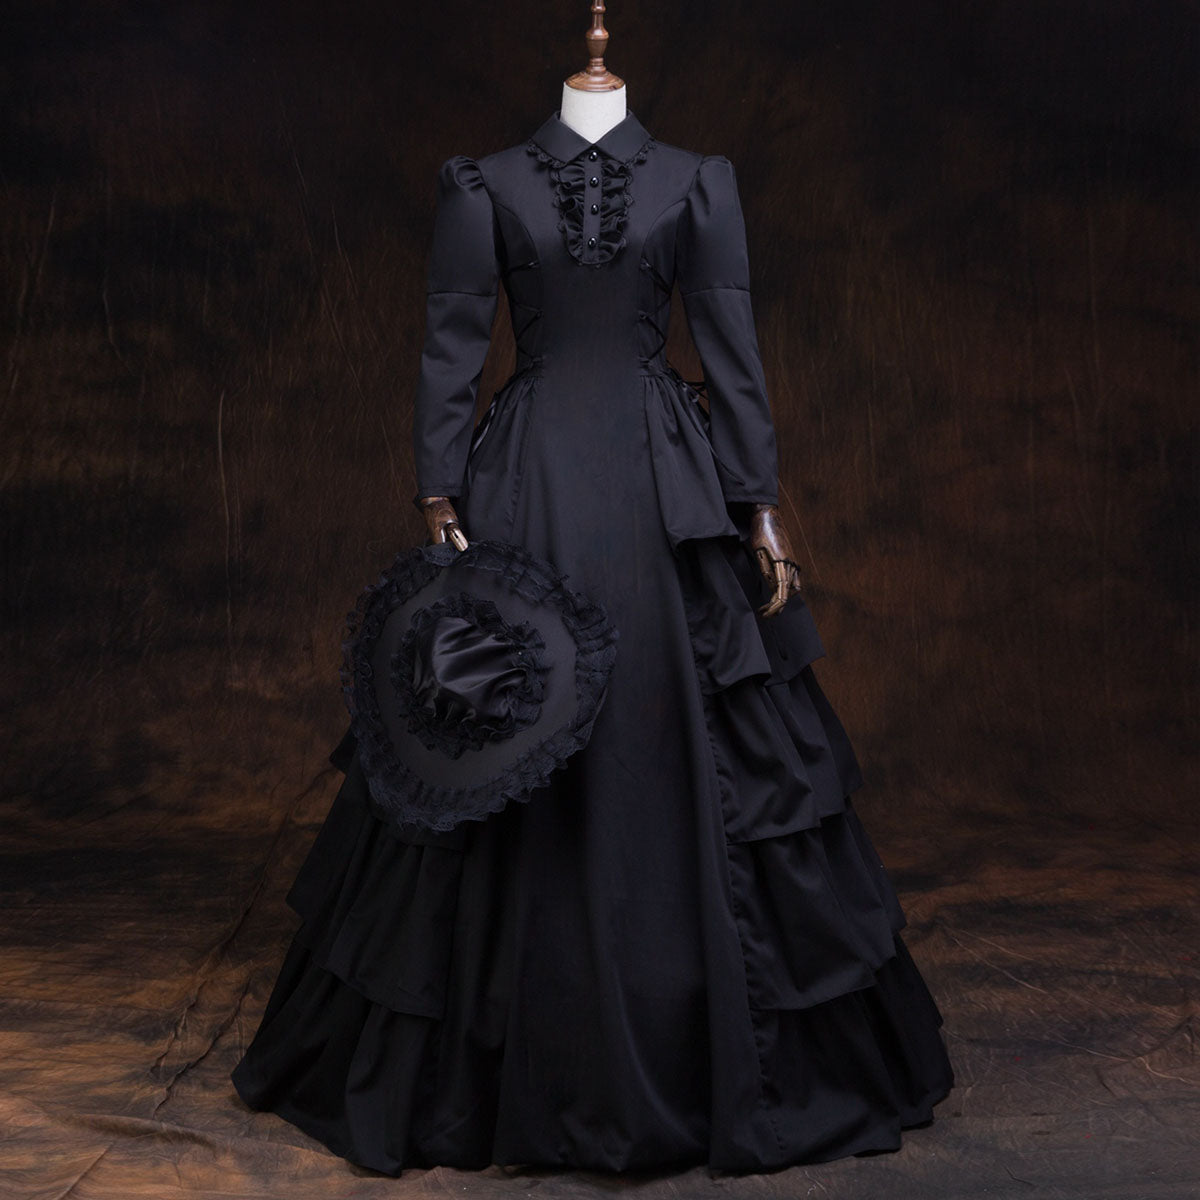 Black Cotton Victorian Gothic Girl Steampunk Maid Dress Historical Period Theater Costume